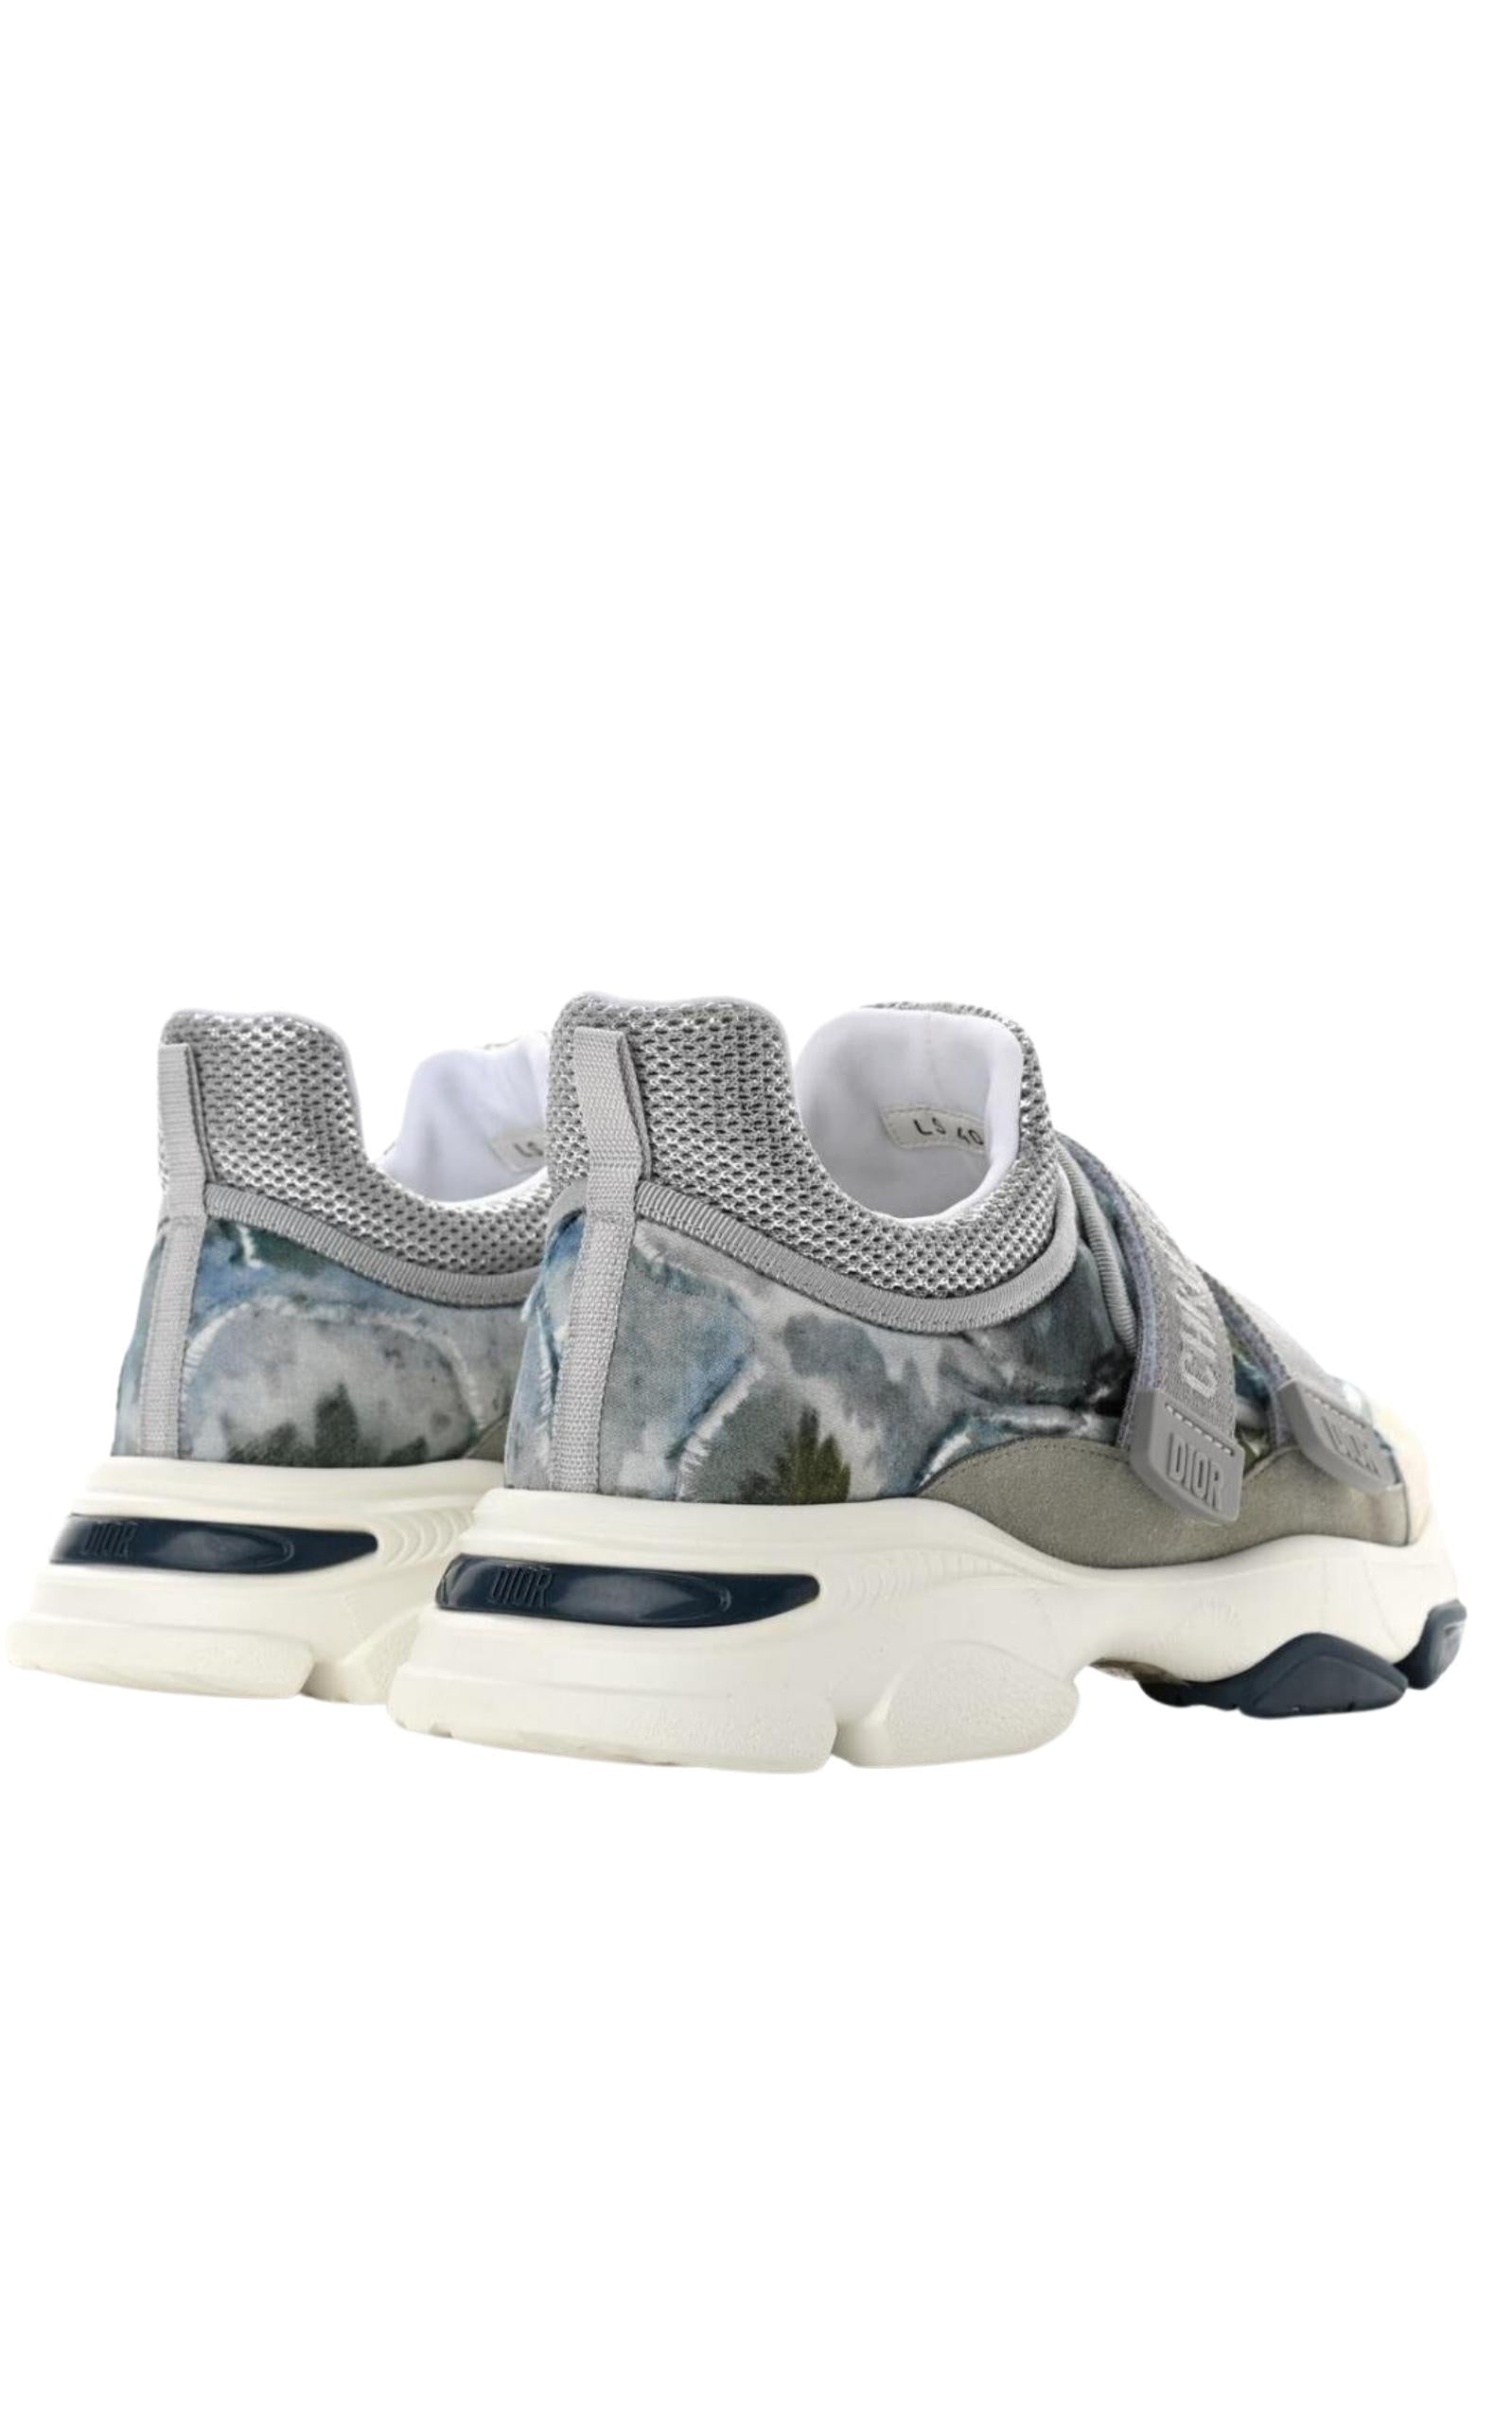 D-Wander Camouflage Techno Fabric Sneakers - 3